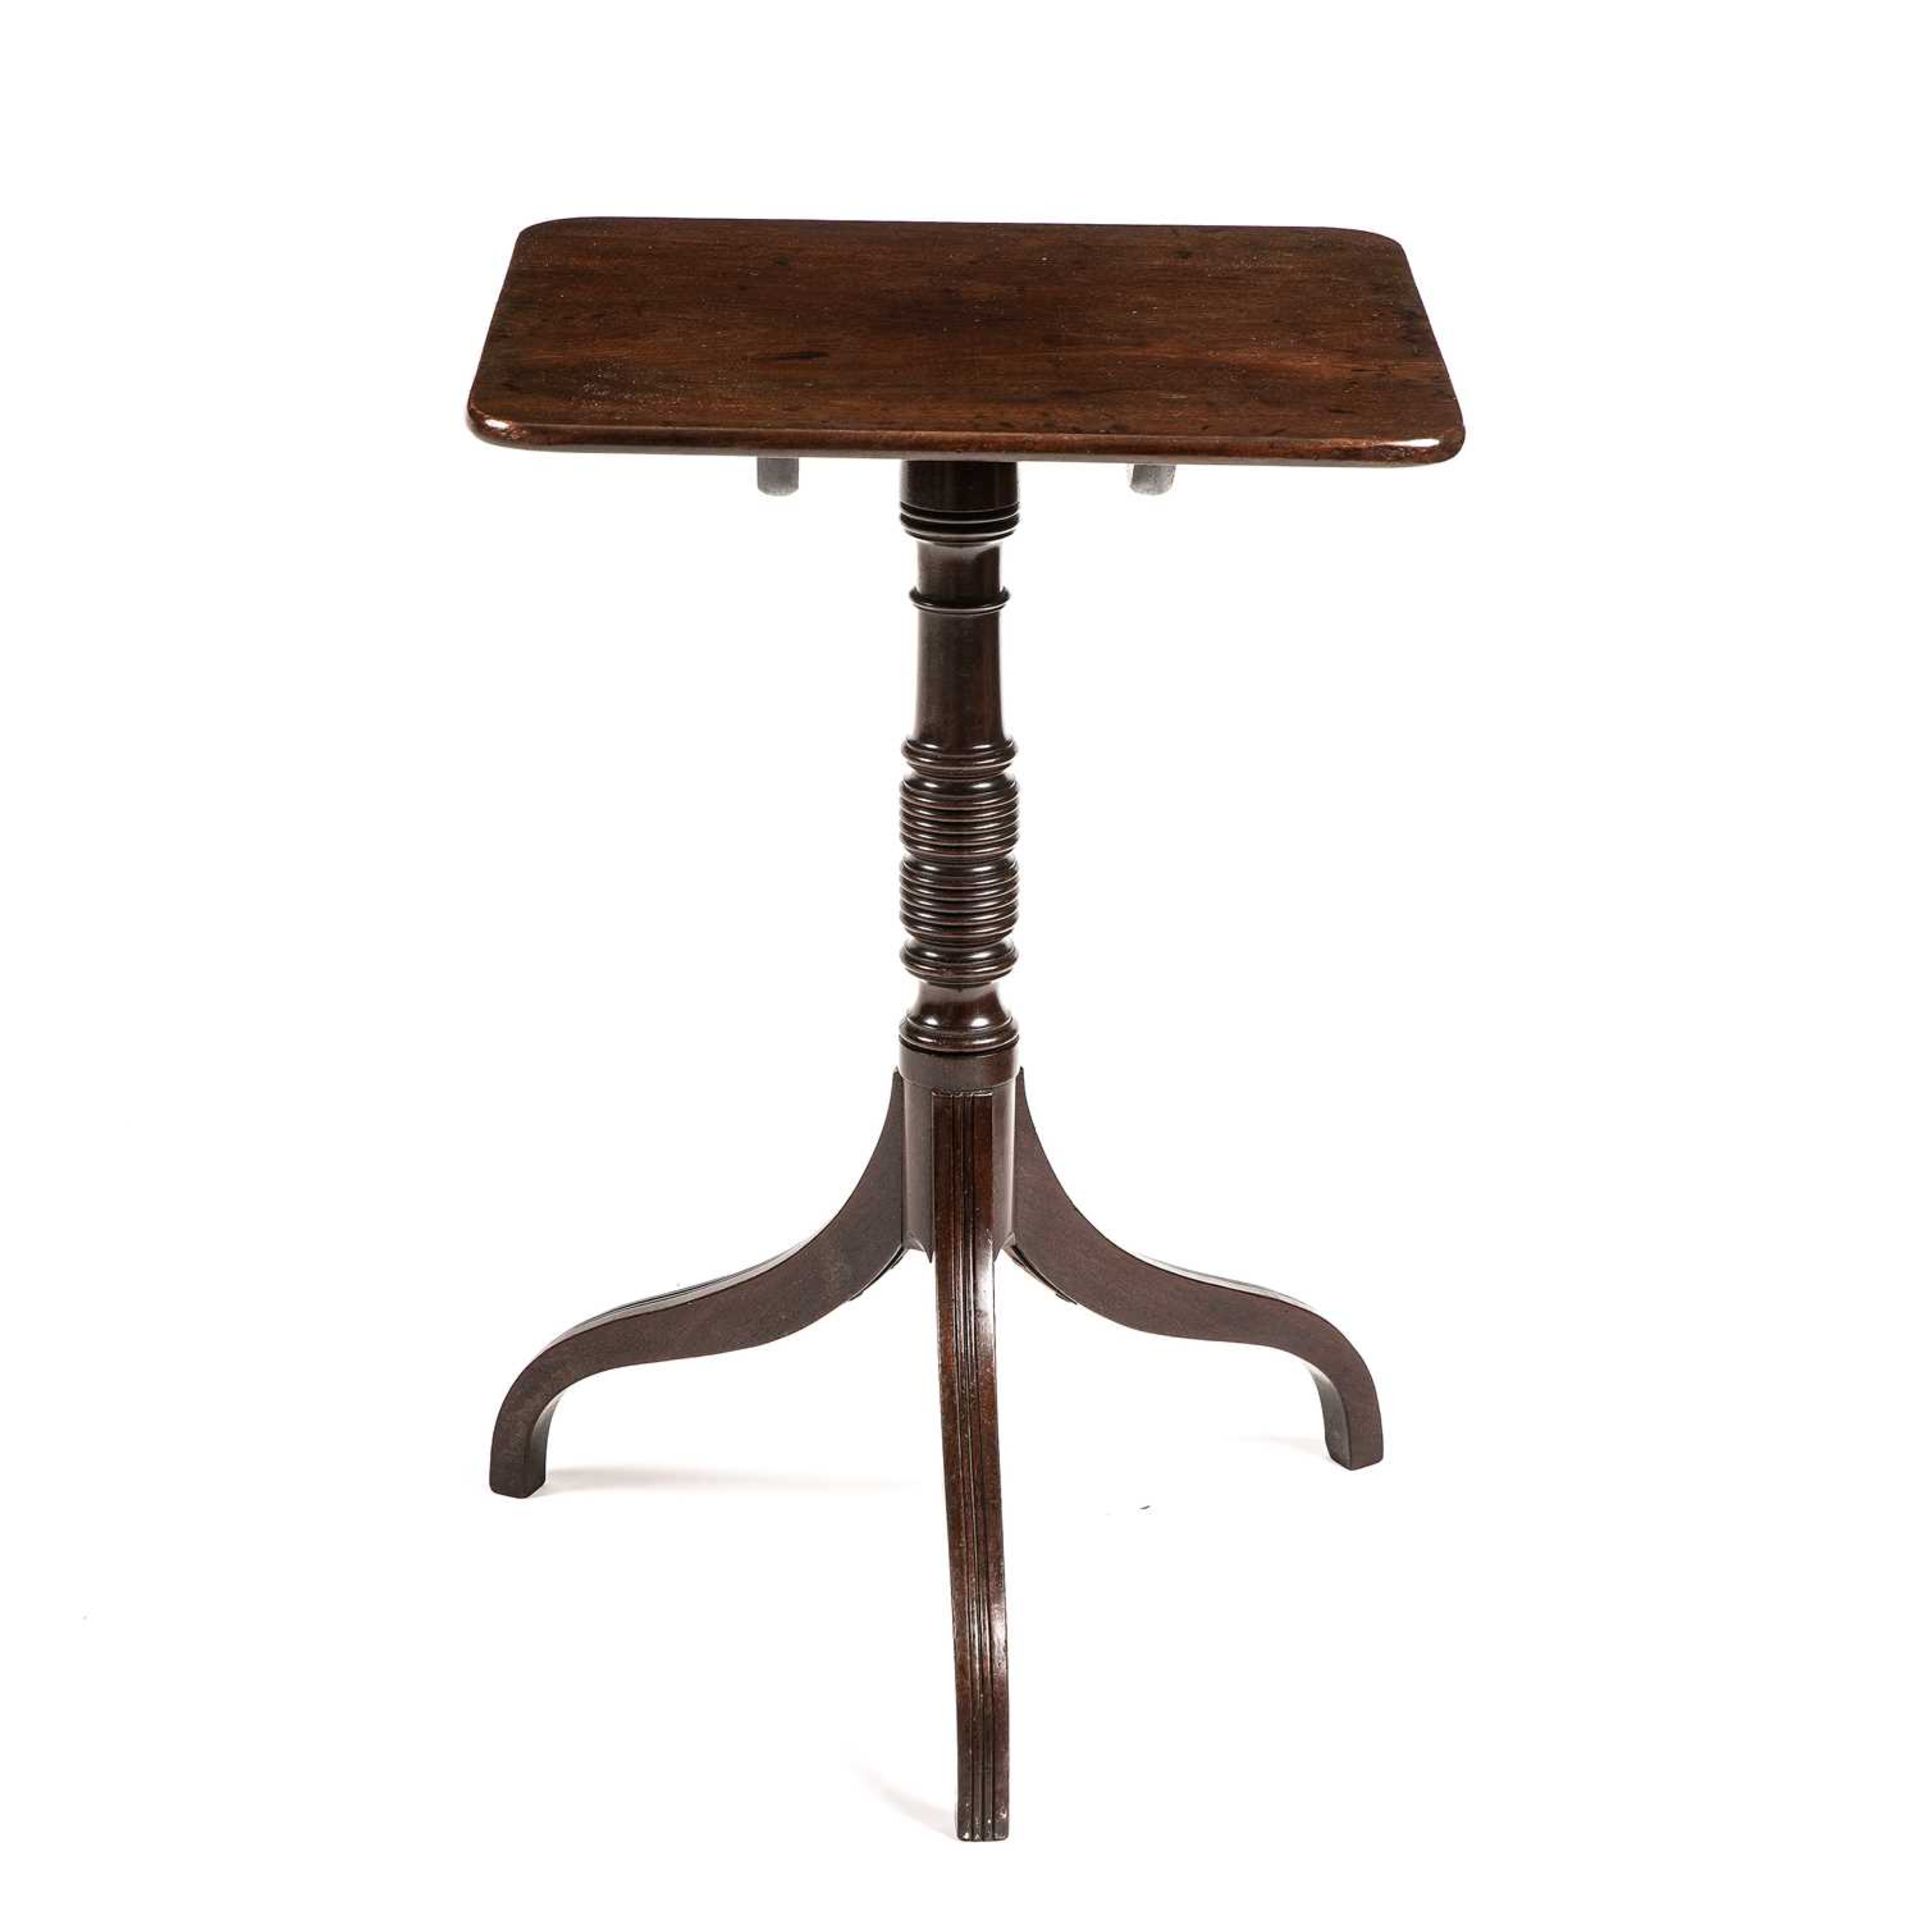 A Regency mahogany tilt top wine table with a turned stem and tripod base. 49cm wide 44cm deep - Image 2 of 3